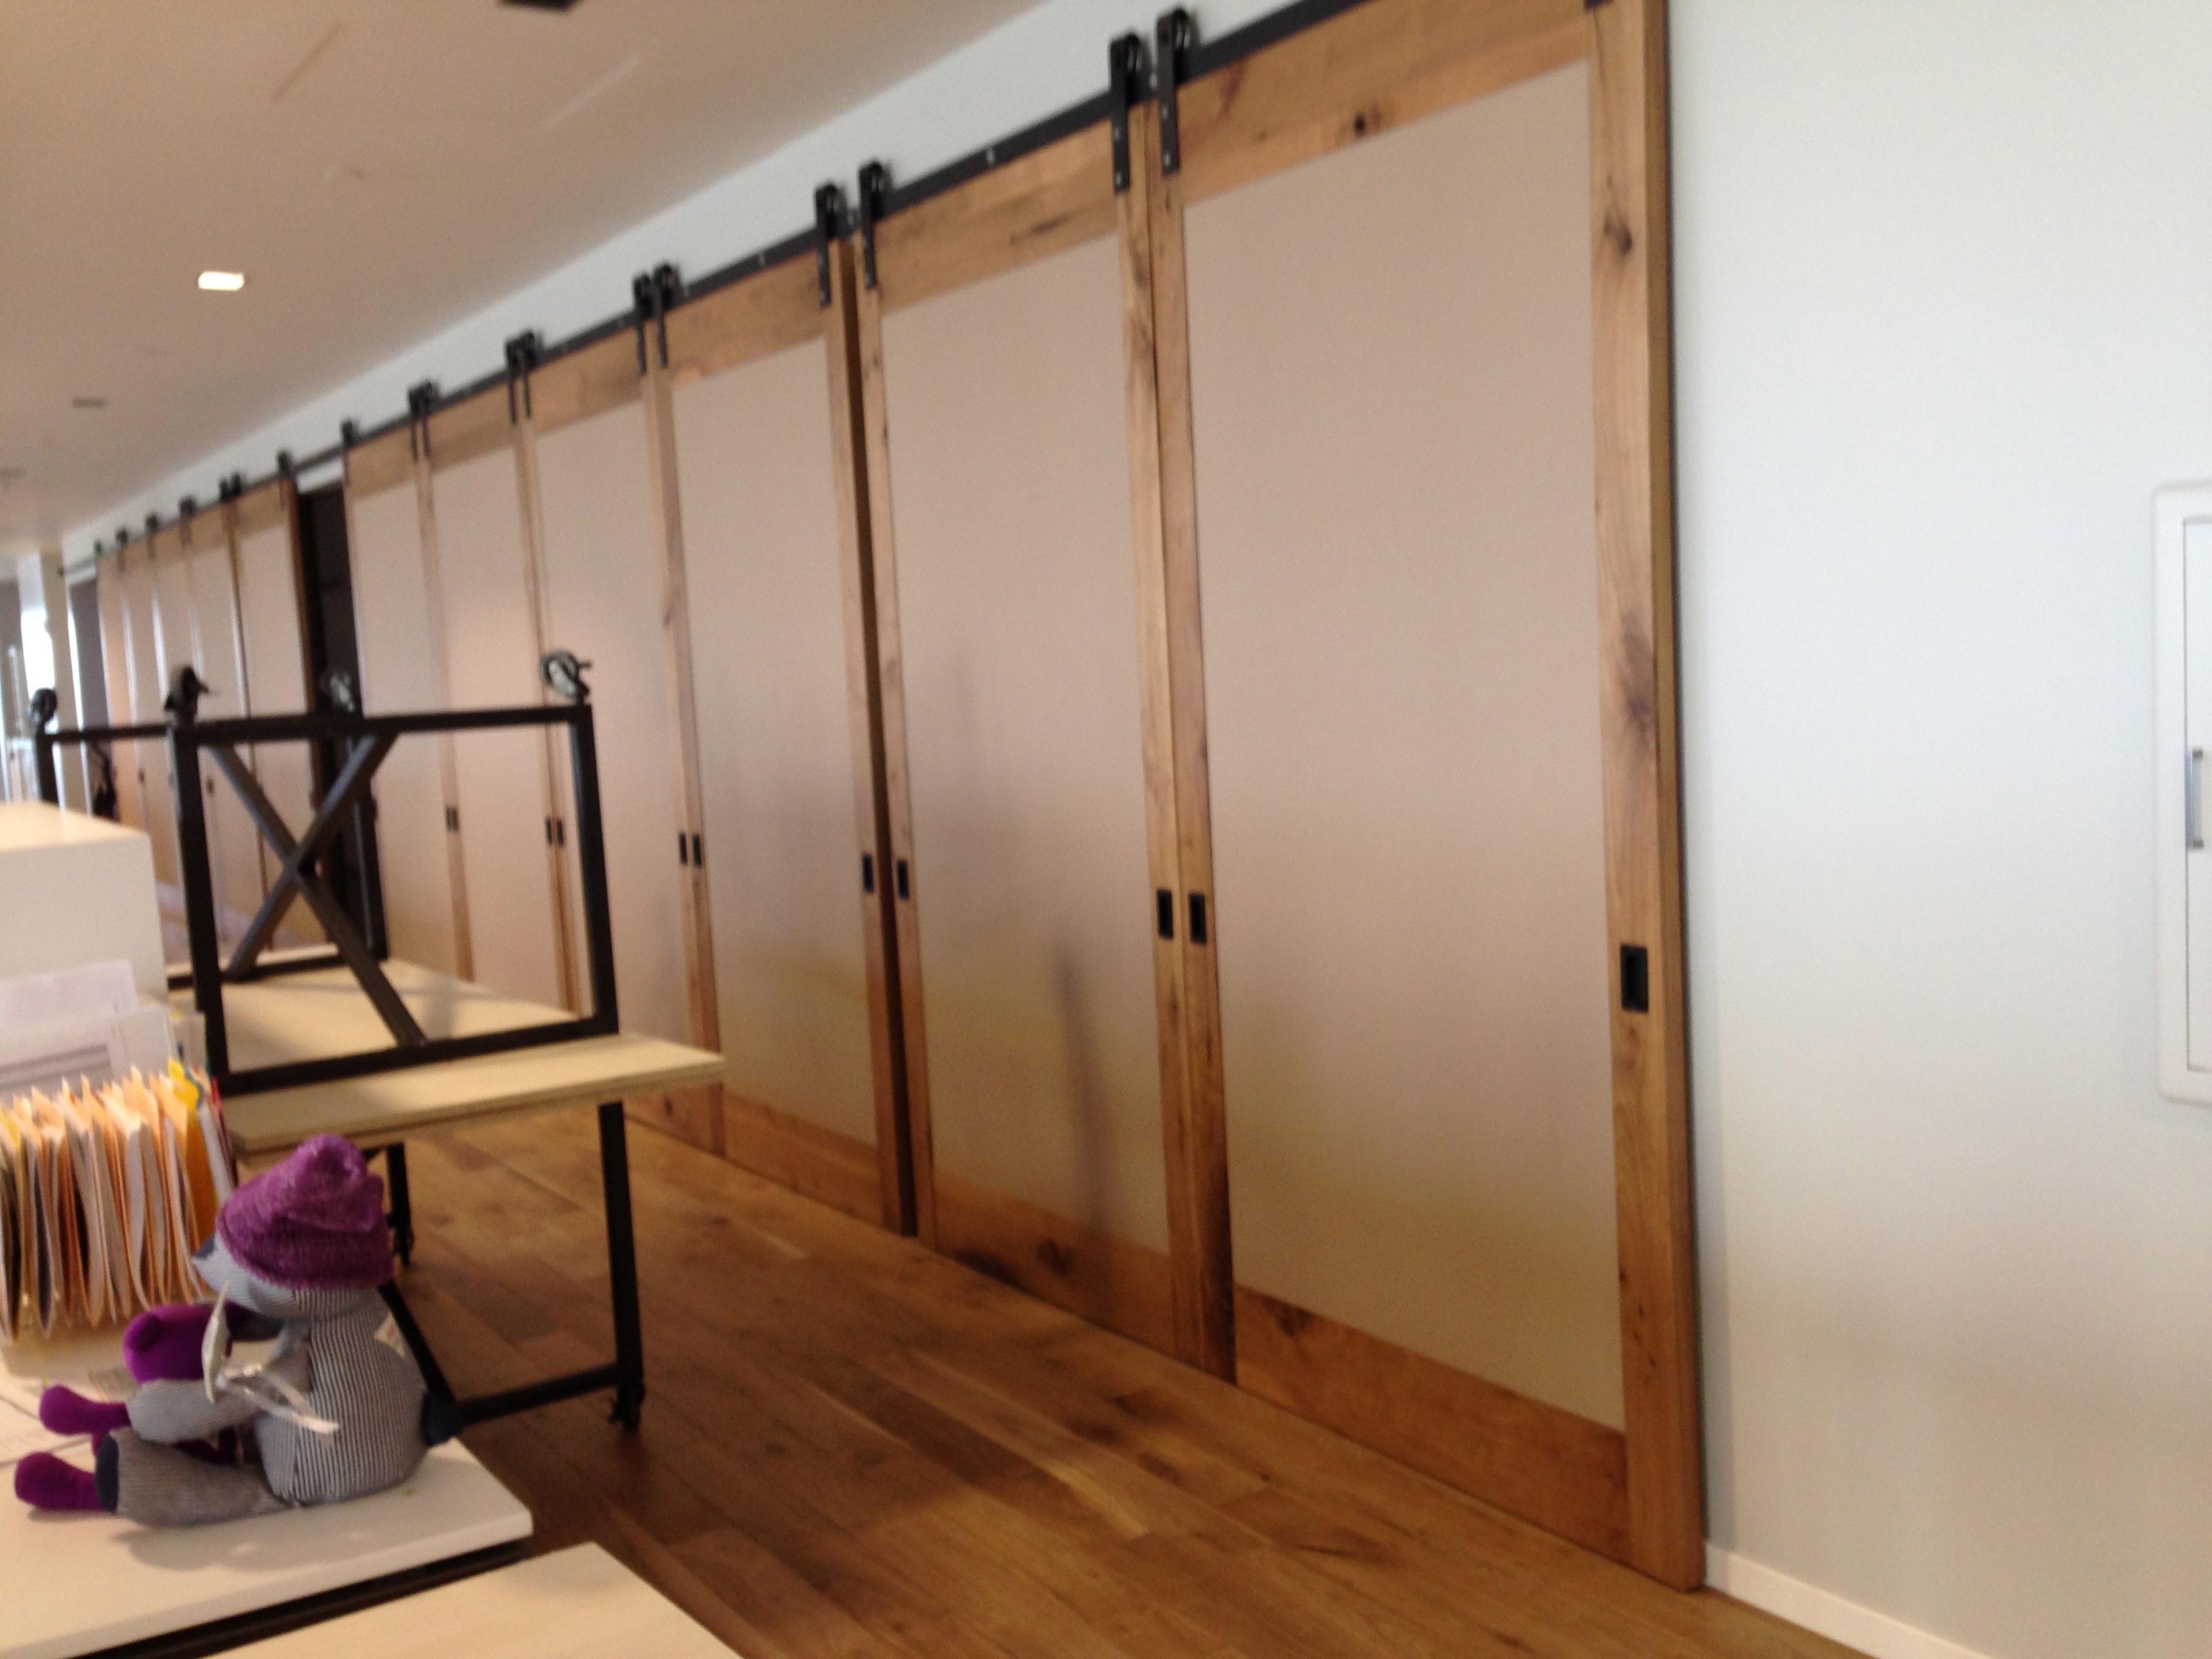 Sliding Doors For Separating Roomslarge sliding doors eco friendly insulated lightweight high